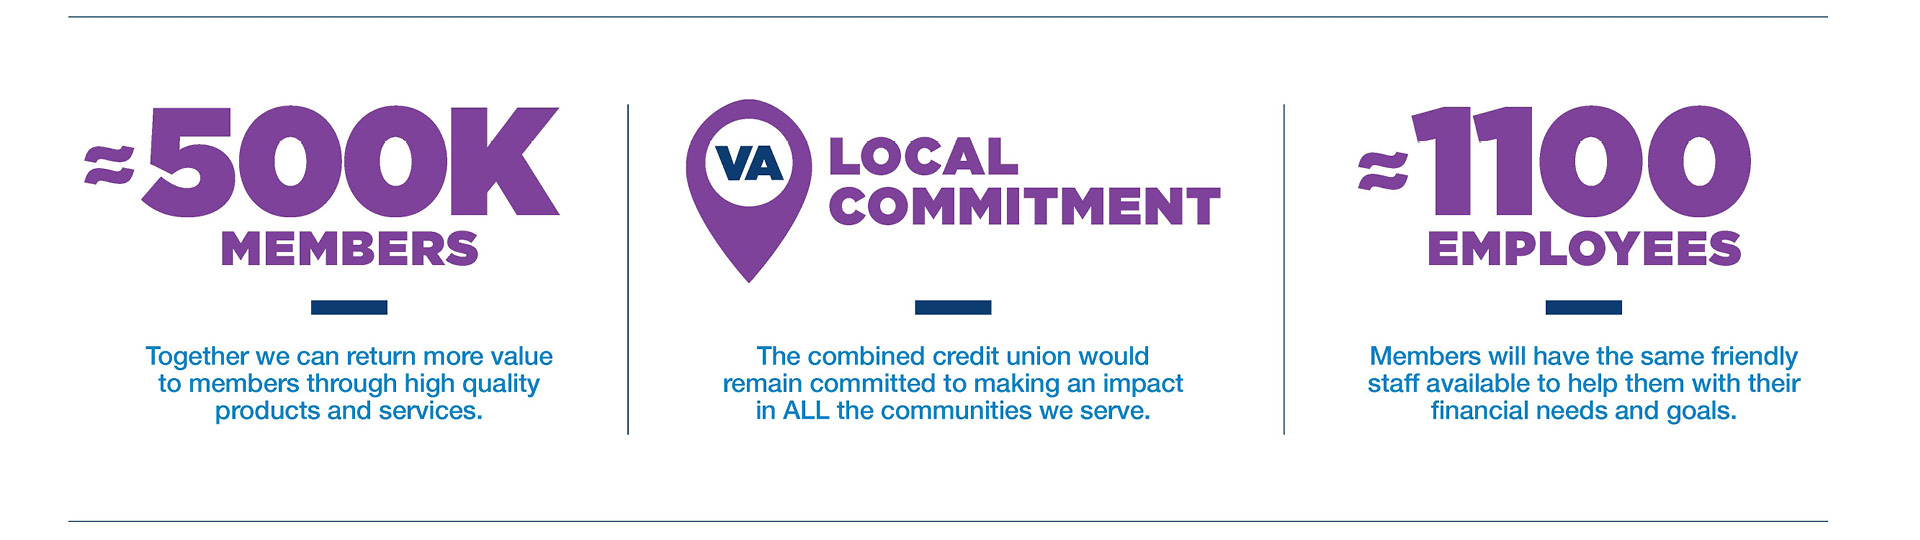 Approximately 500,000 members, local commitment to Virginia and close to 1,100 employees